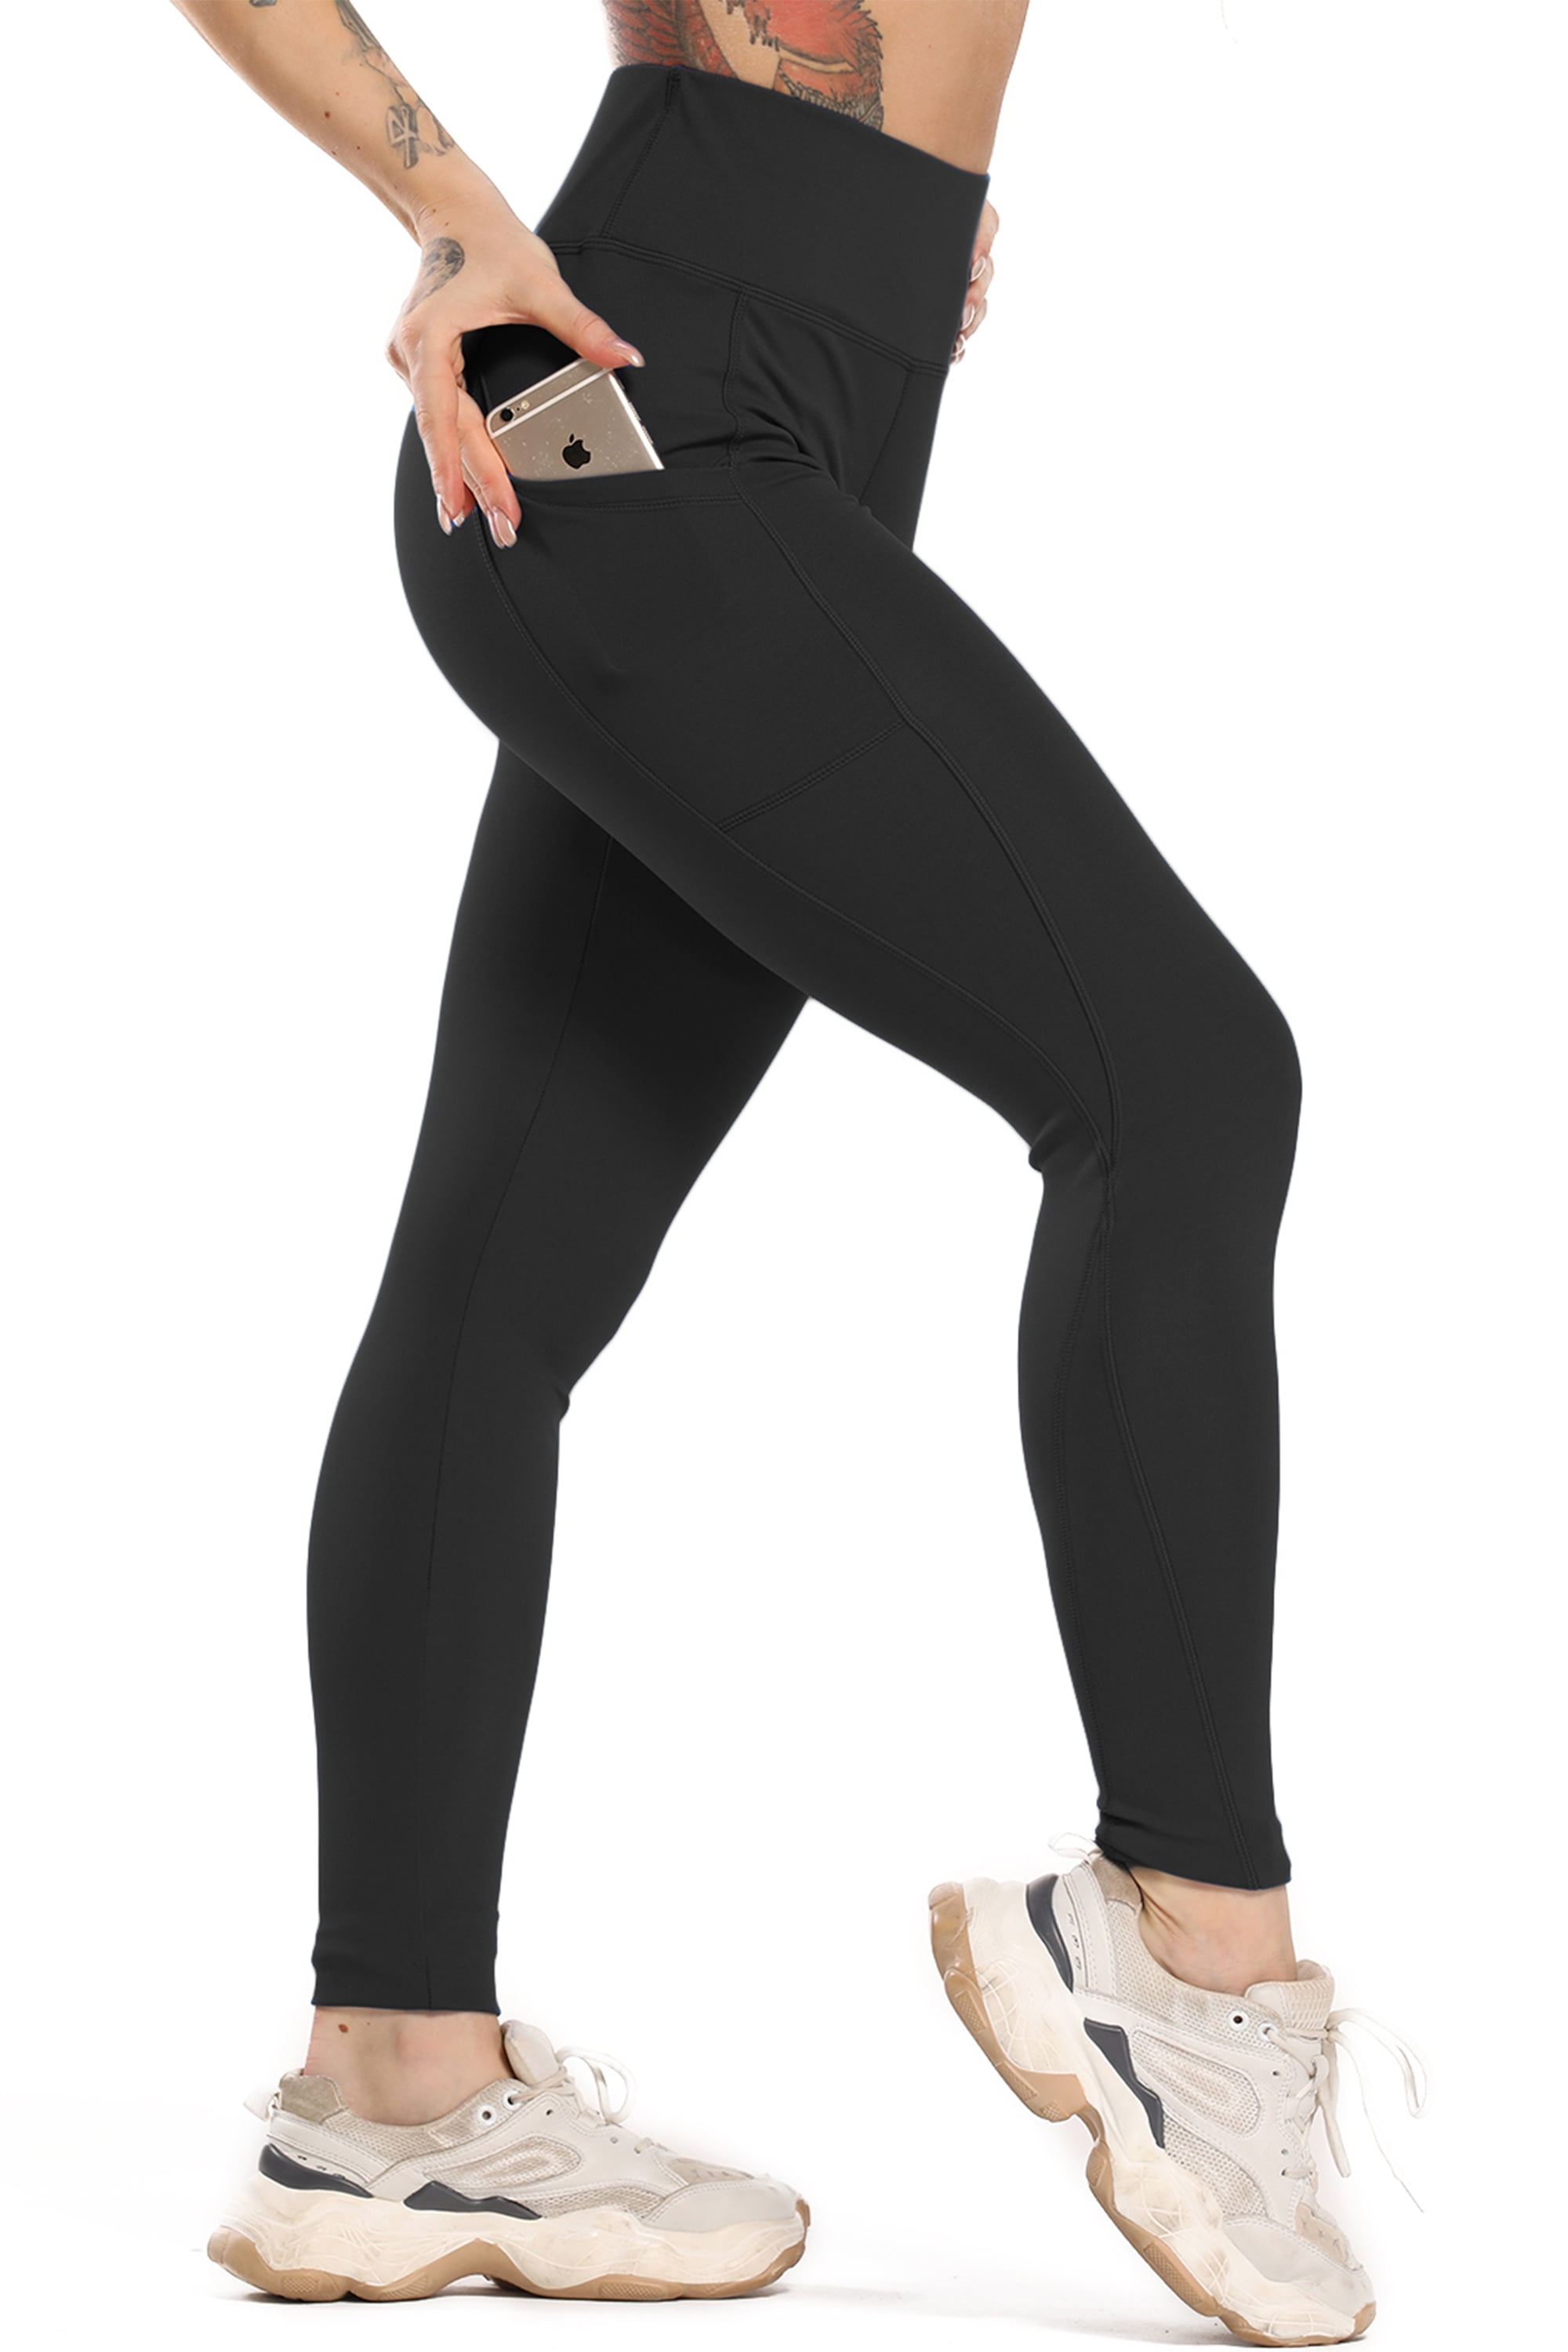 Fittoo - FITTOO High Waist Yoga Pants with Pockets for Women Tummy ...